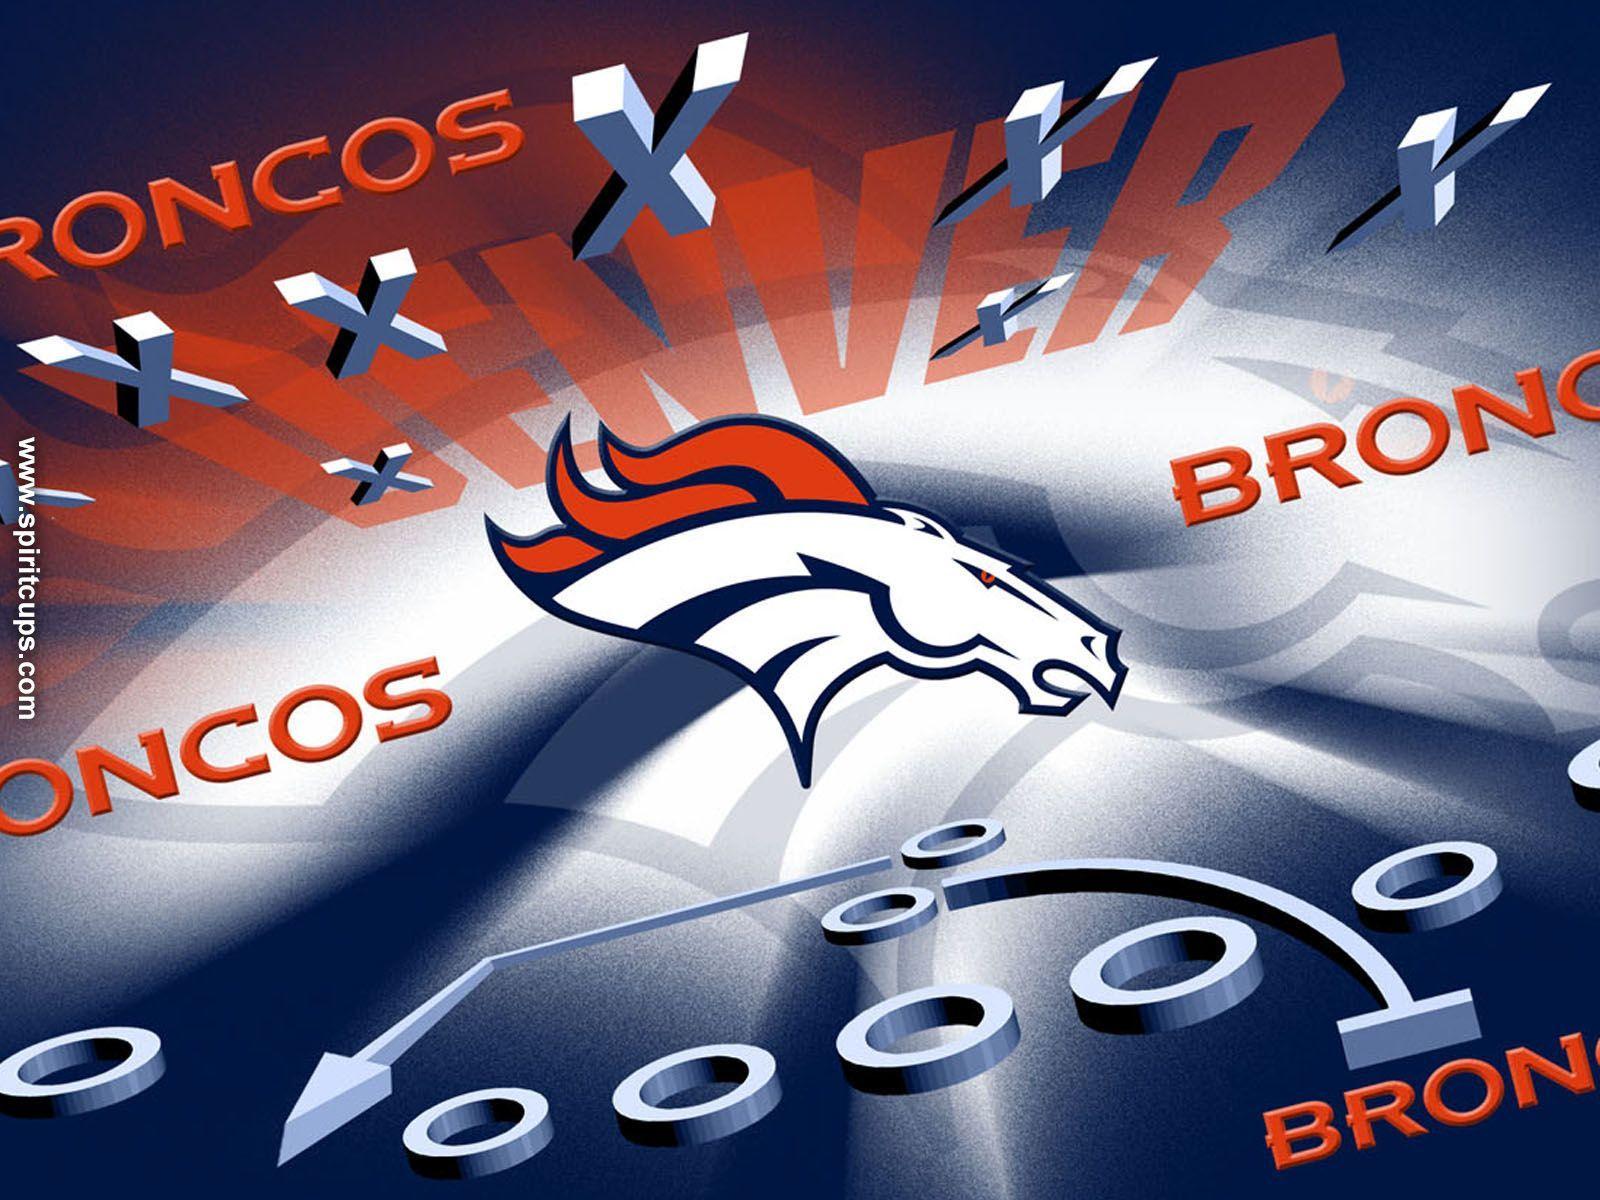 Free wallpaper of Denver broncos for IPad. Background of the day